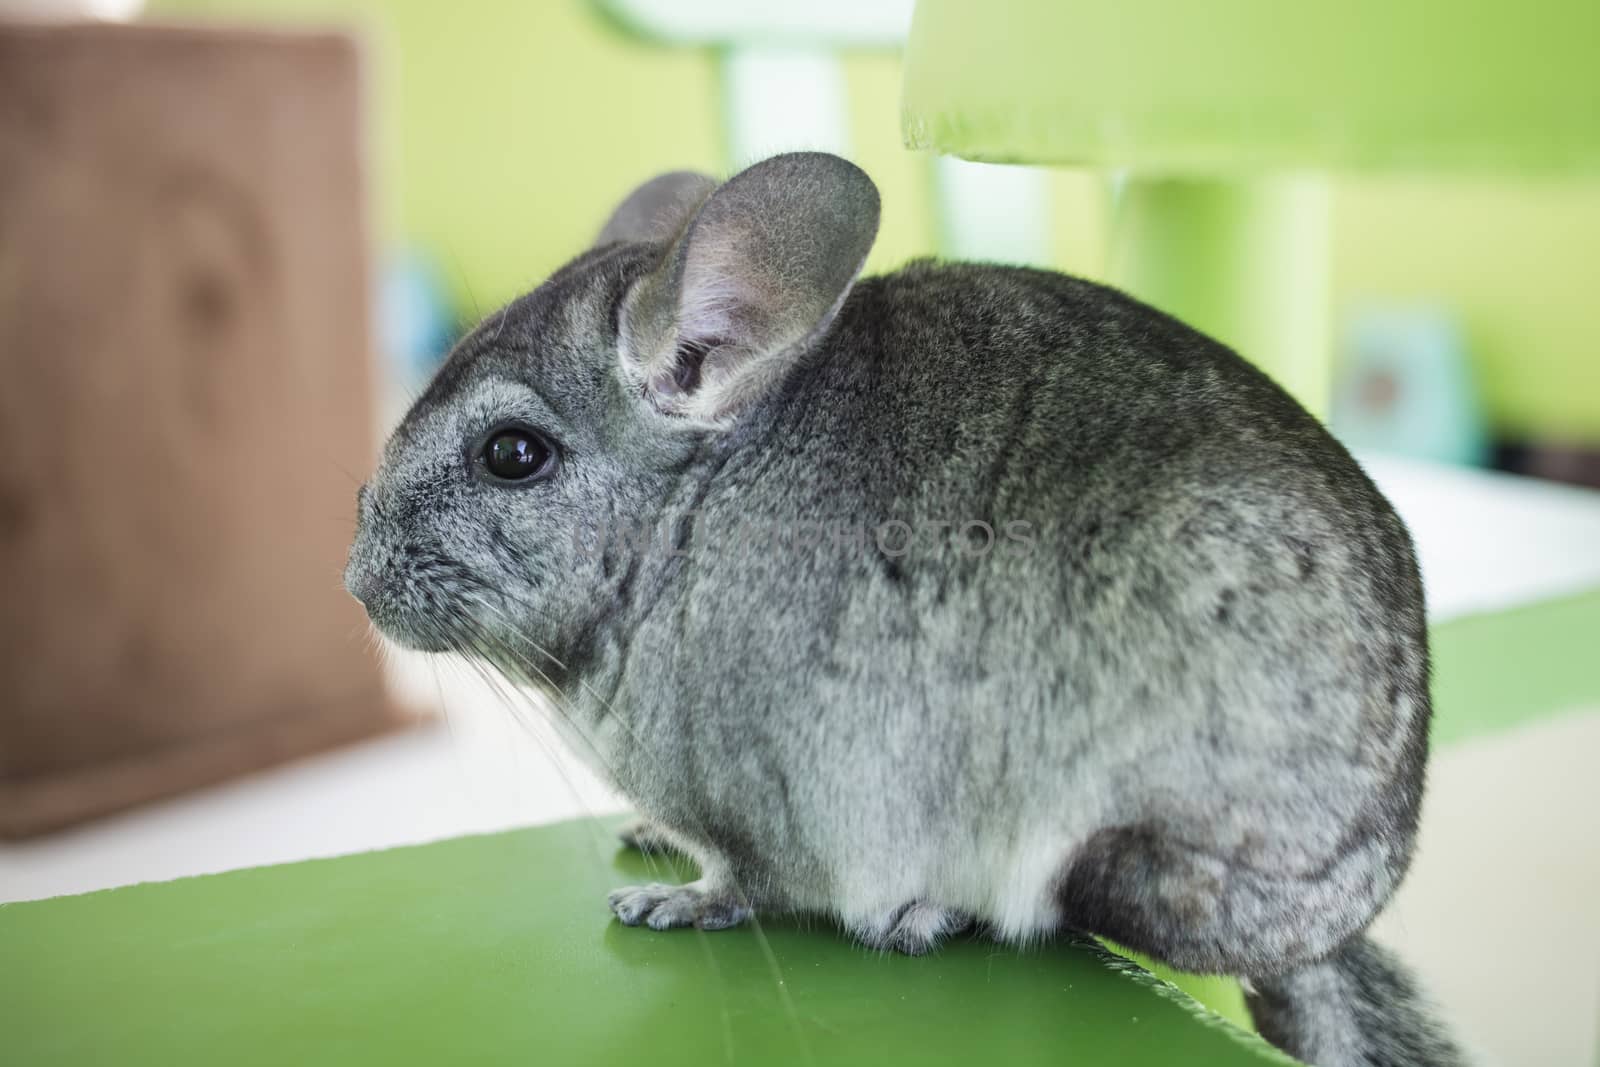 Chinchilla grey color, sitting in chair